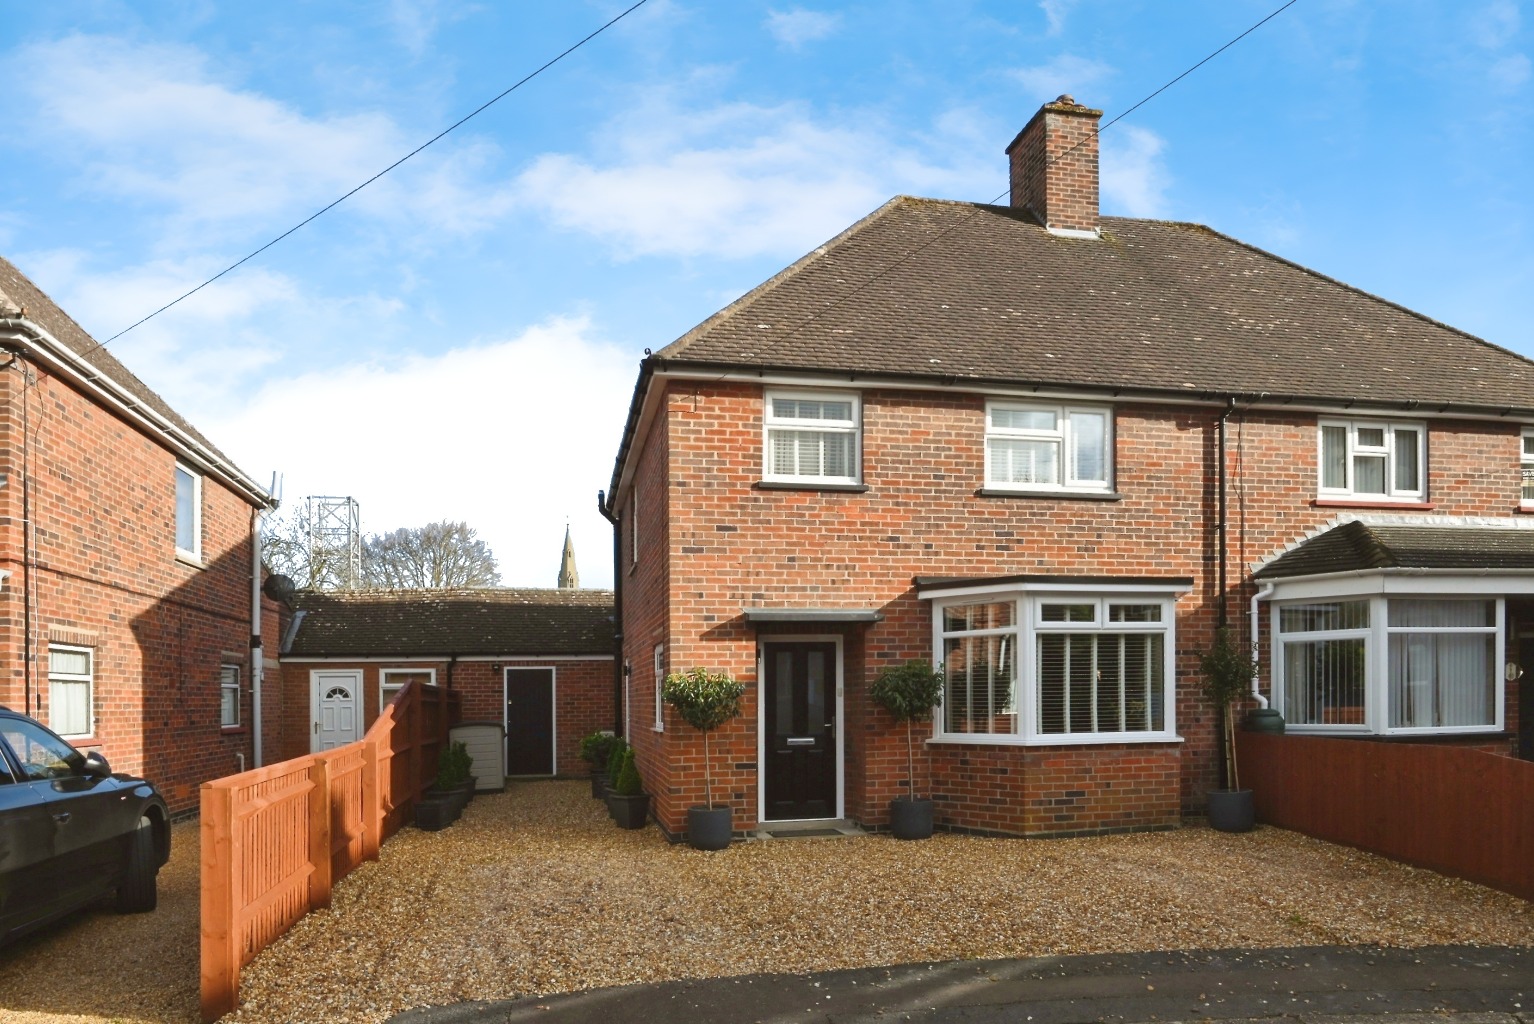 3 bed semi-detached house for sale in Tollfield, Huntingdon - Property Image 1